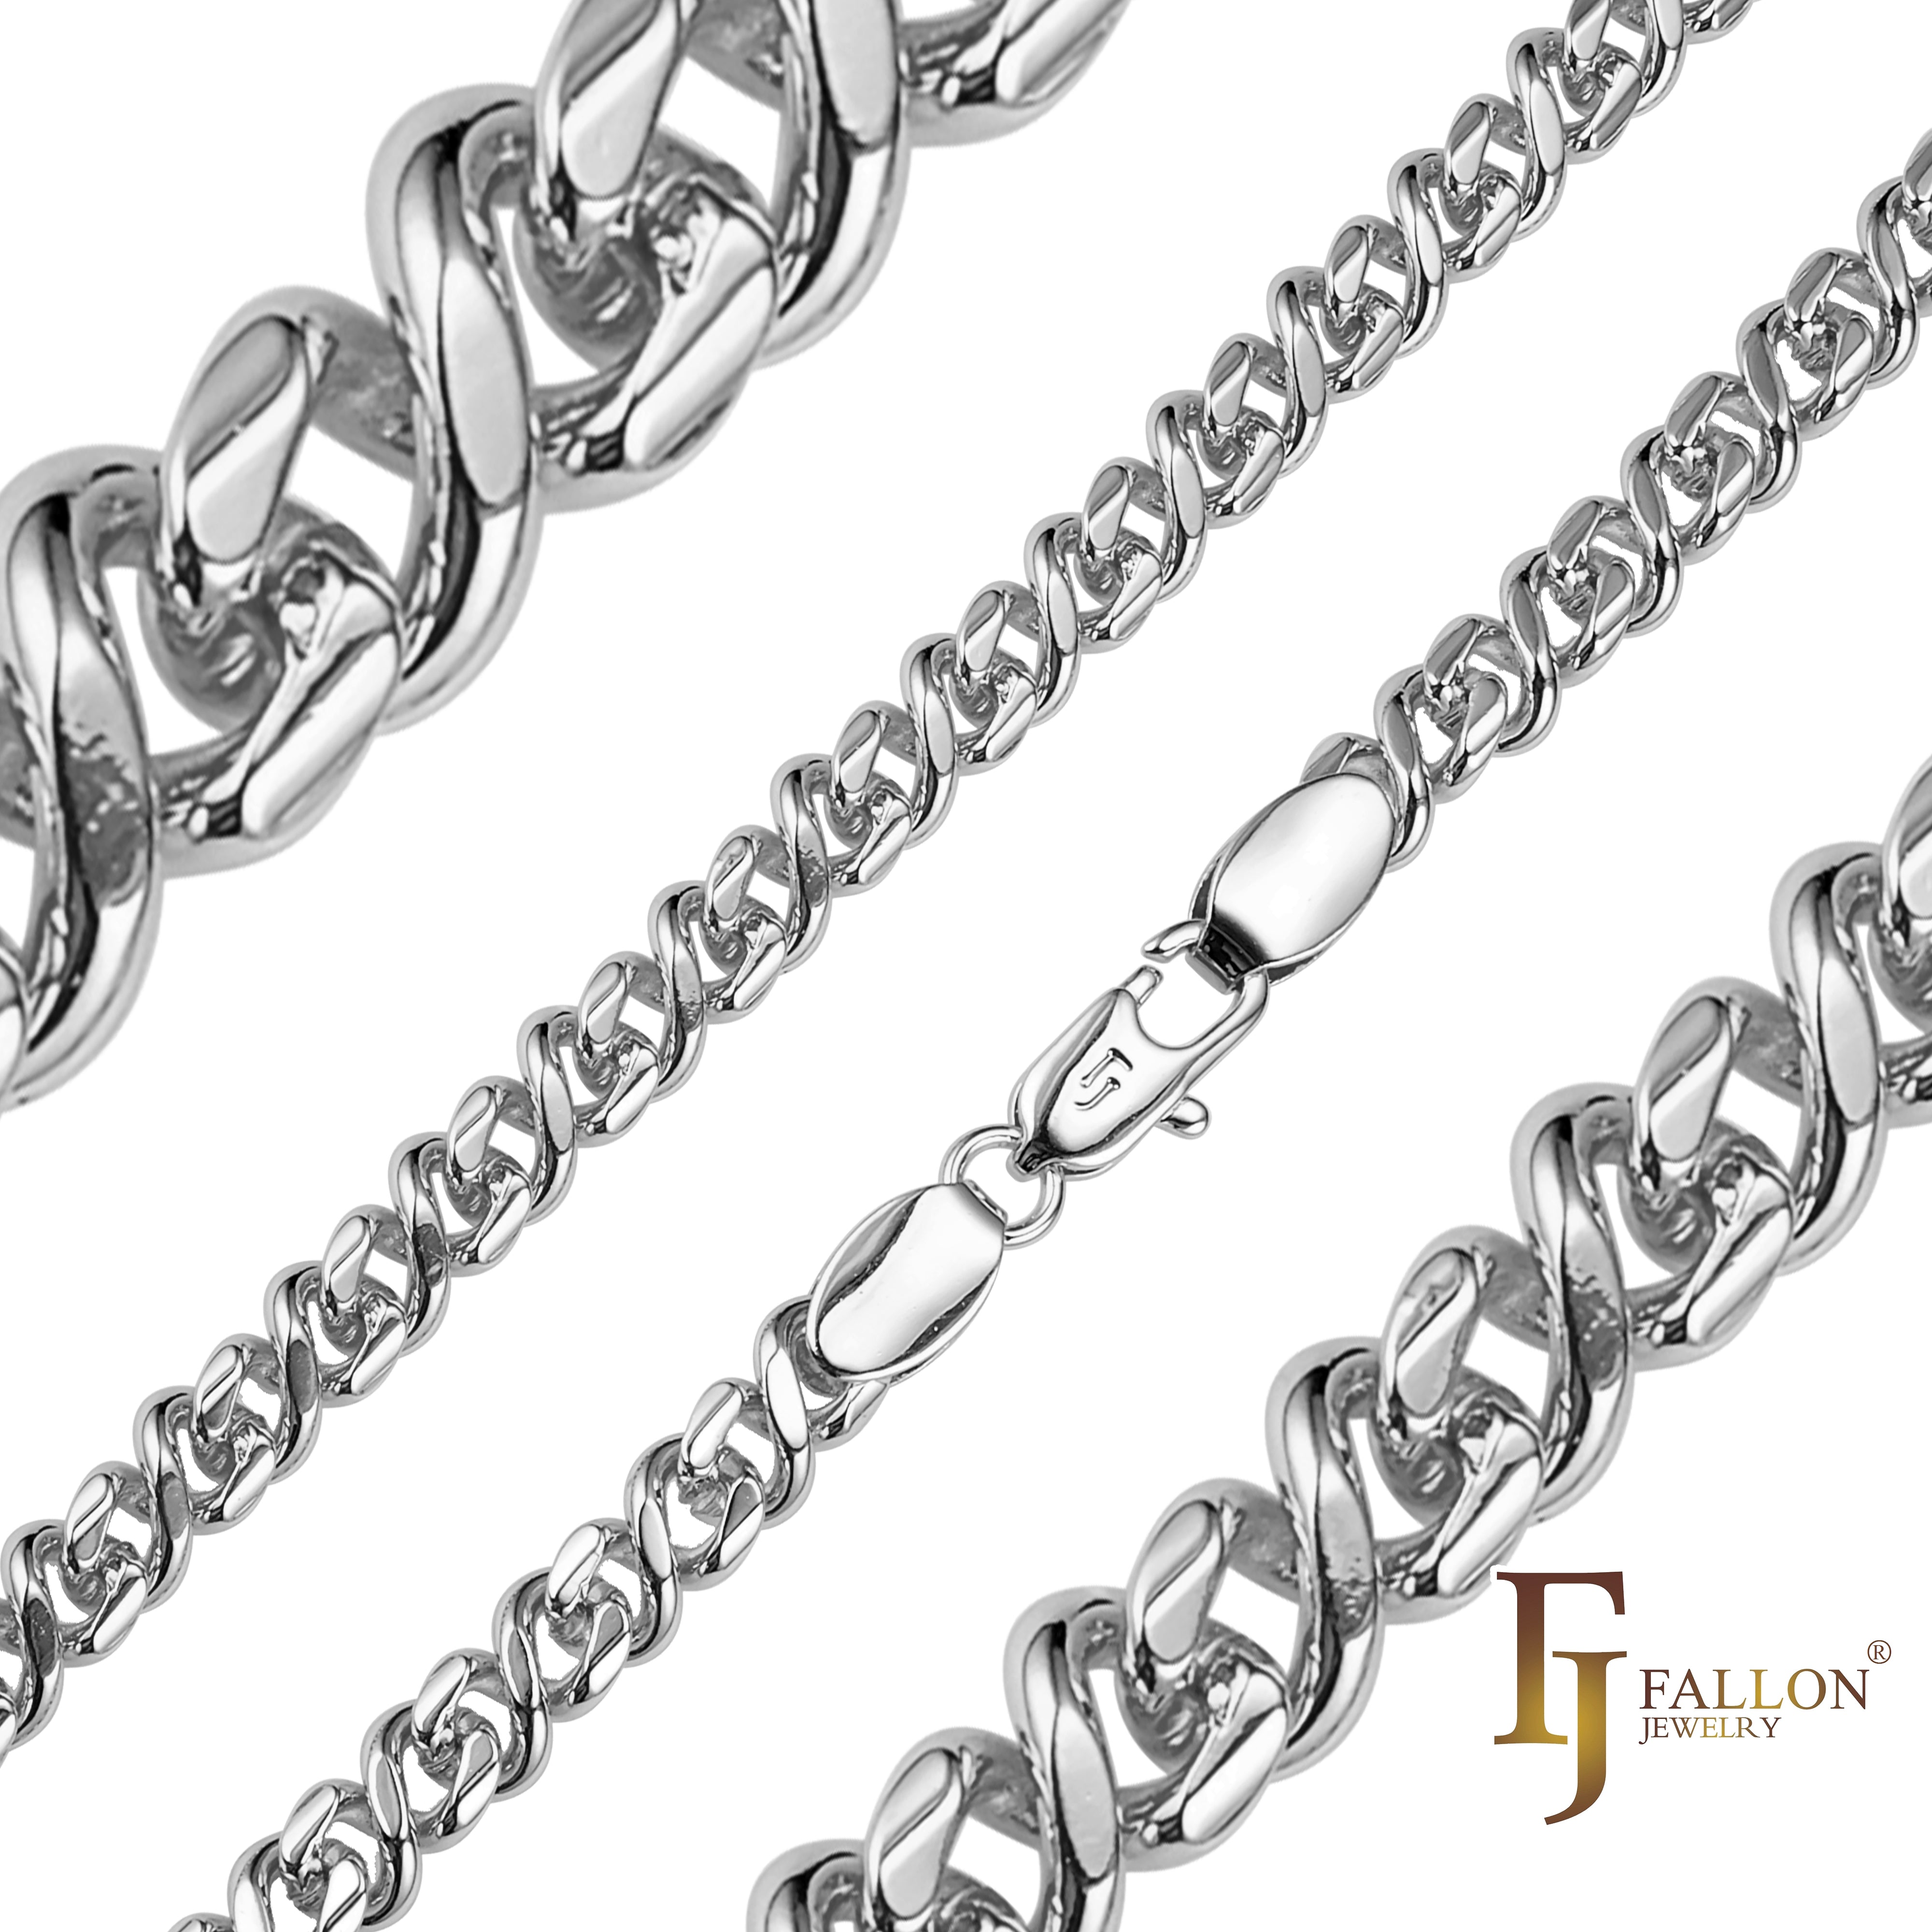 .Classic Infinity 8 link chains plated in White Gold, 14K Gold, Rose Gold, two tone